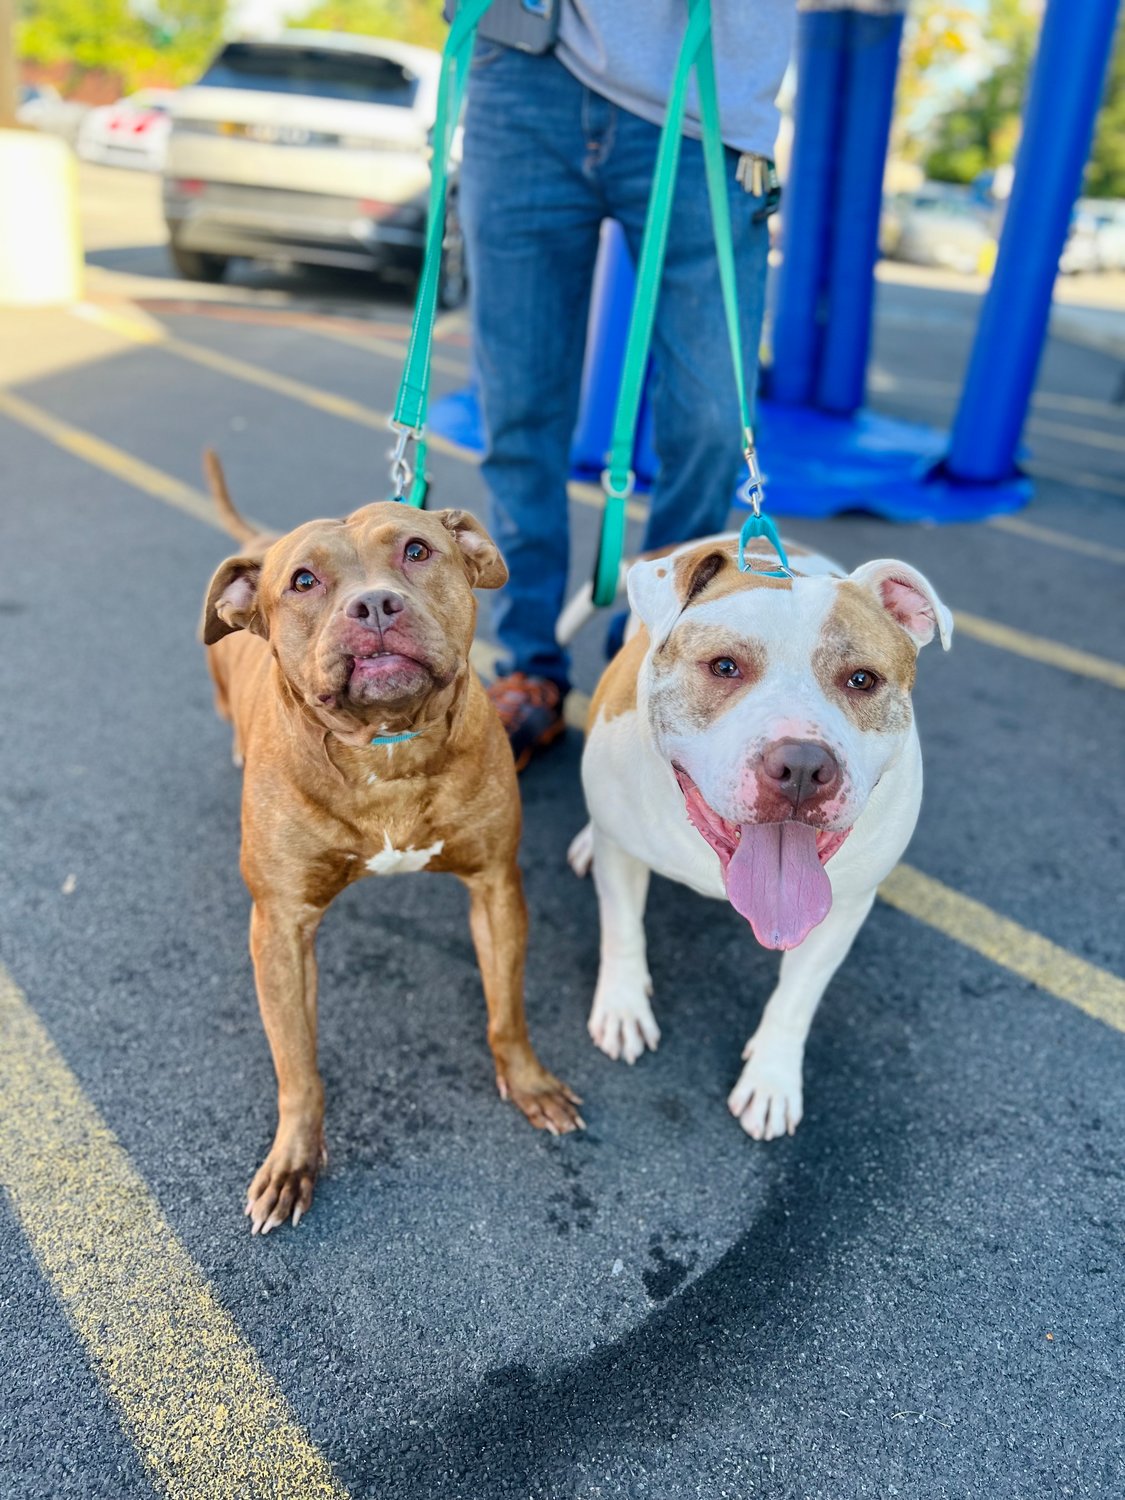 Lola and Debo are still waiting for their hero to come along! They are a bonded pair and are 7 years old. On Oct. 13, they will have been at the shelter for one year, so we really want to find them a home together. They have attended events and did great around other dogs and meeting people of all ages. They like to go for walks and play outside, but they’re at the perfect age where they would be equally as content cuddling up on the couch. The beauty of adopting a bonded pair is they already have a friend and you know they adore each other. Lola &amp; Debo are spayed/neutered, current on vaccines, and microchipped. Their adoption fee is reduced to $120 for both. Lola does have a fatty tumor on her chest and a cyst near her spine, but no treatment is needed for either of those. Stop in during business hours at Anita’s Stevens-Swan Humane Society, 5664 Horatio St., Utica, to meet Lola &amp; Debo or fill out an application at https://www.anitas-sshs.org/adopt/apply/Dog.